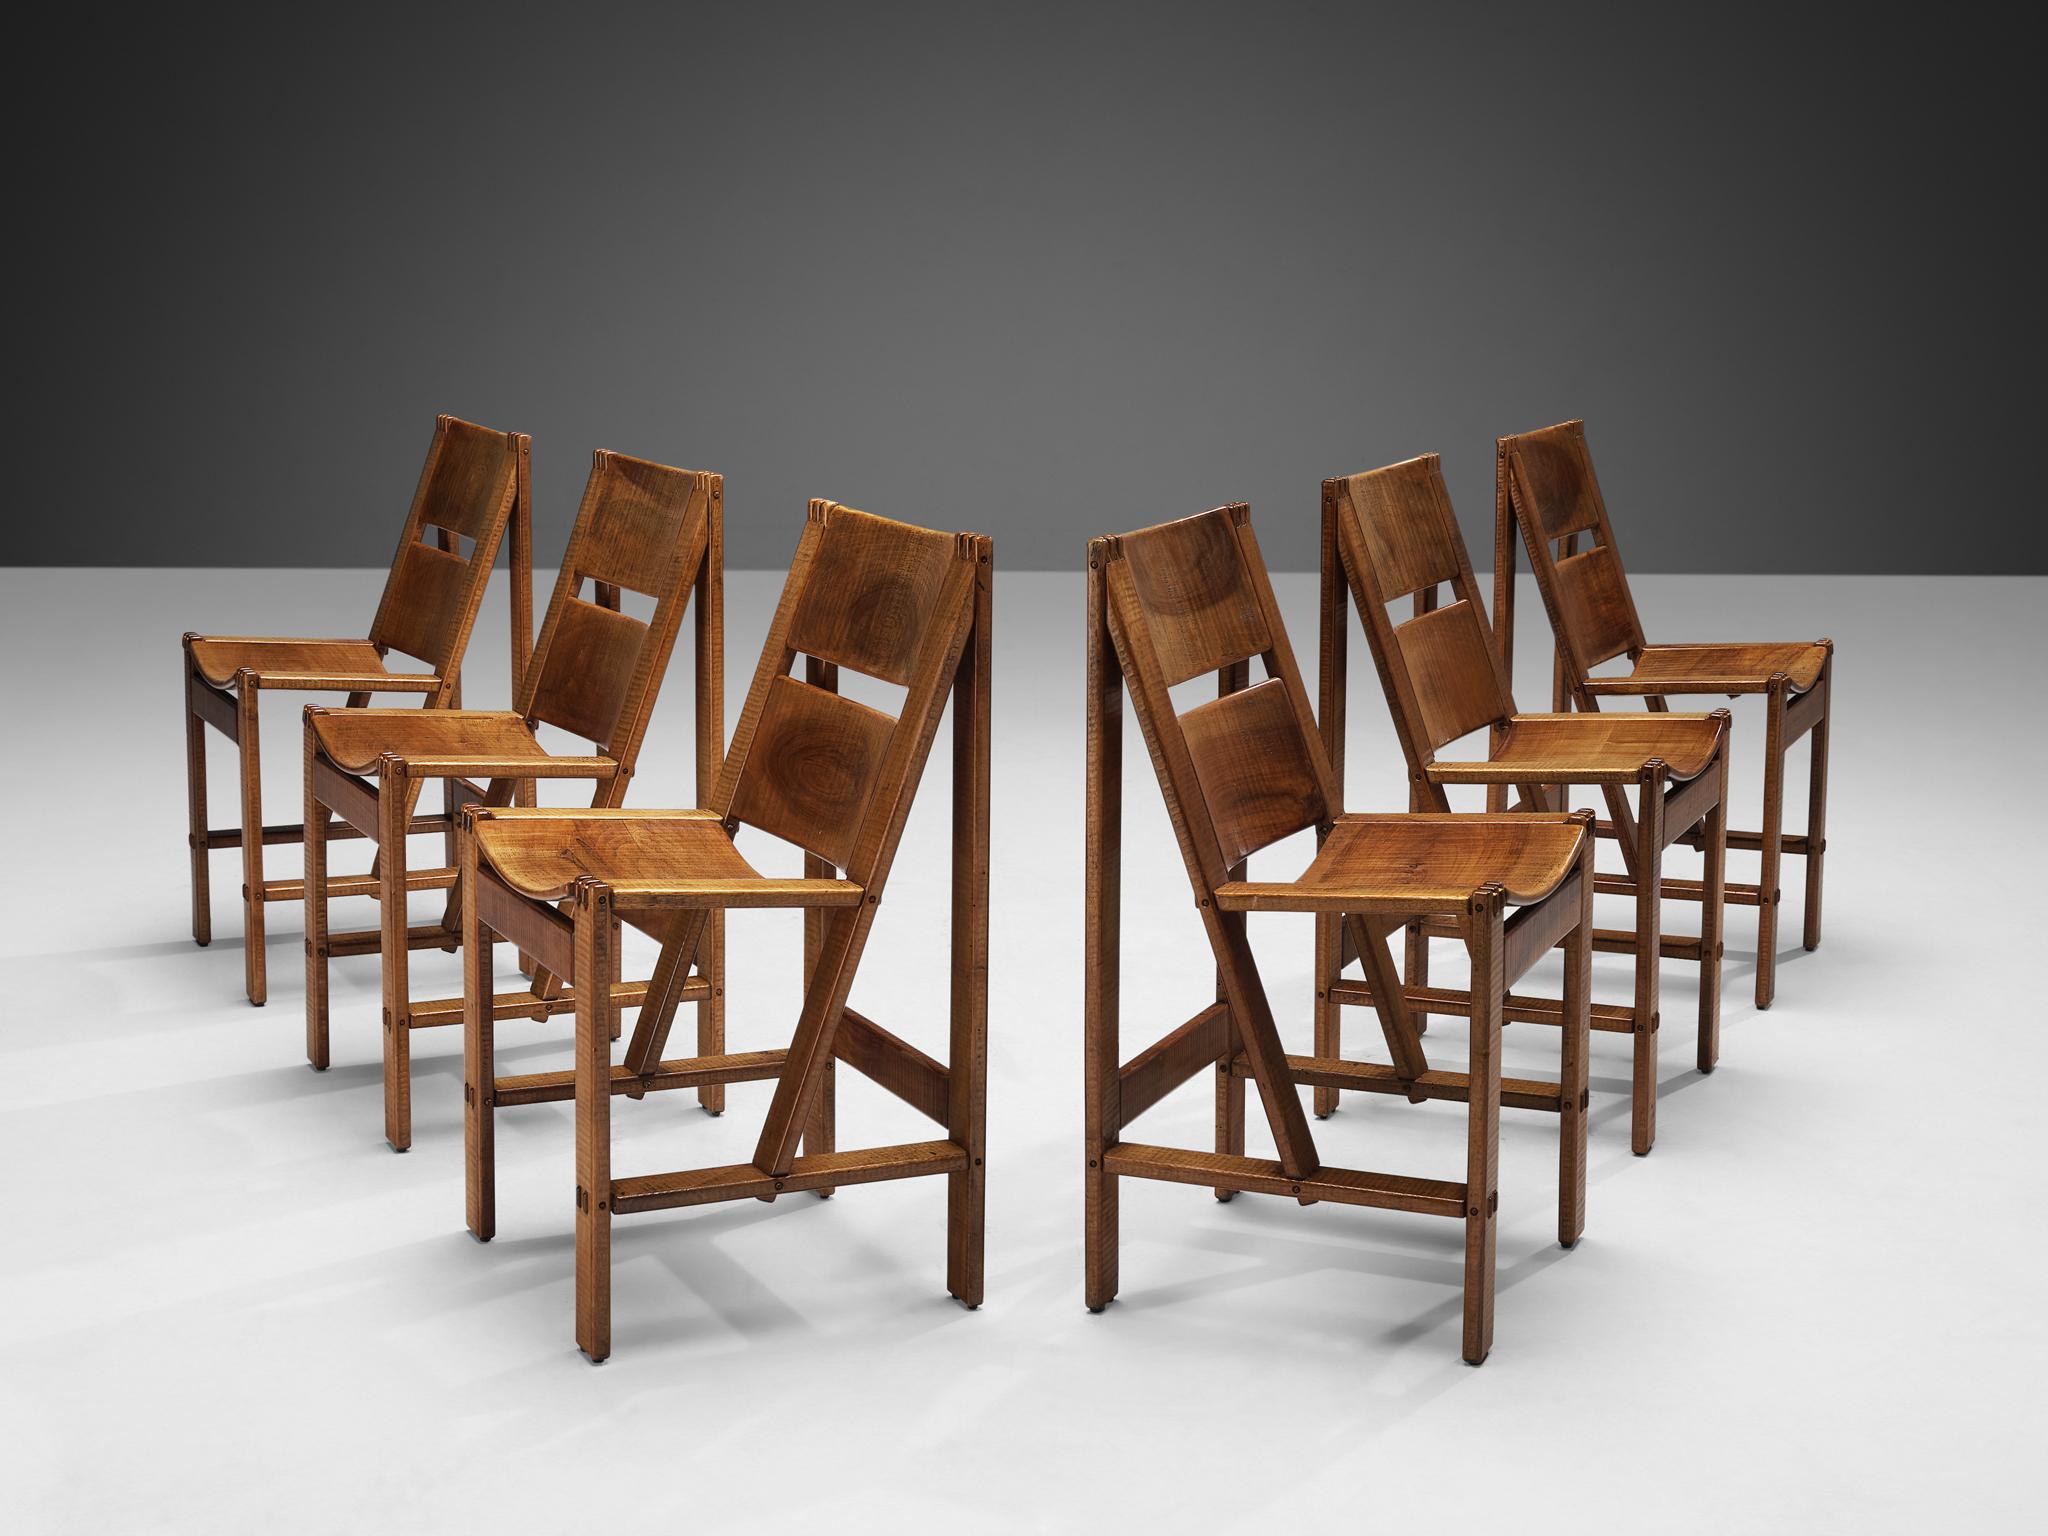 Giuseppe RIvadossi, set of six dining chairs, walnut, design 1962, production from 1968. 

Six dining chairs in walnut designed by the Italian designer Giuseppe Rivadossi. Defiant in design, these chairs are truly remarkable. The interesting